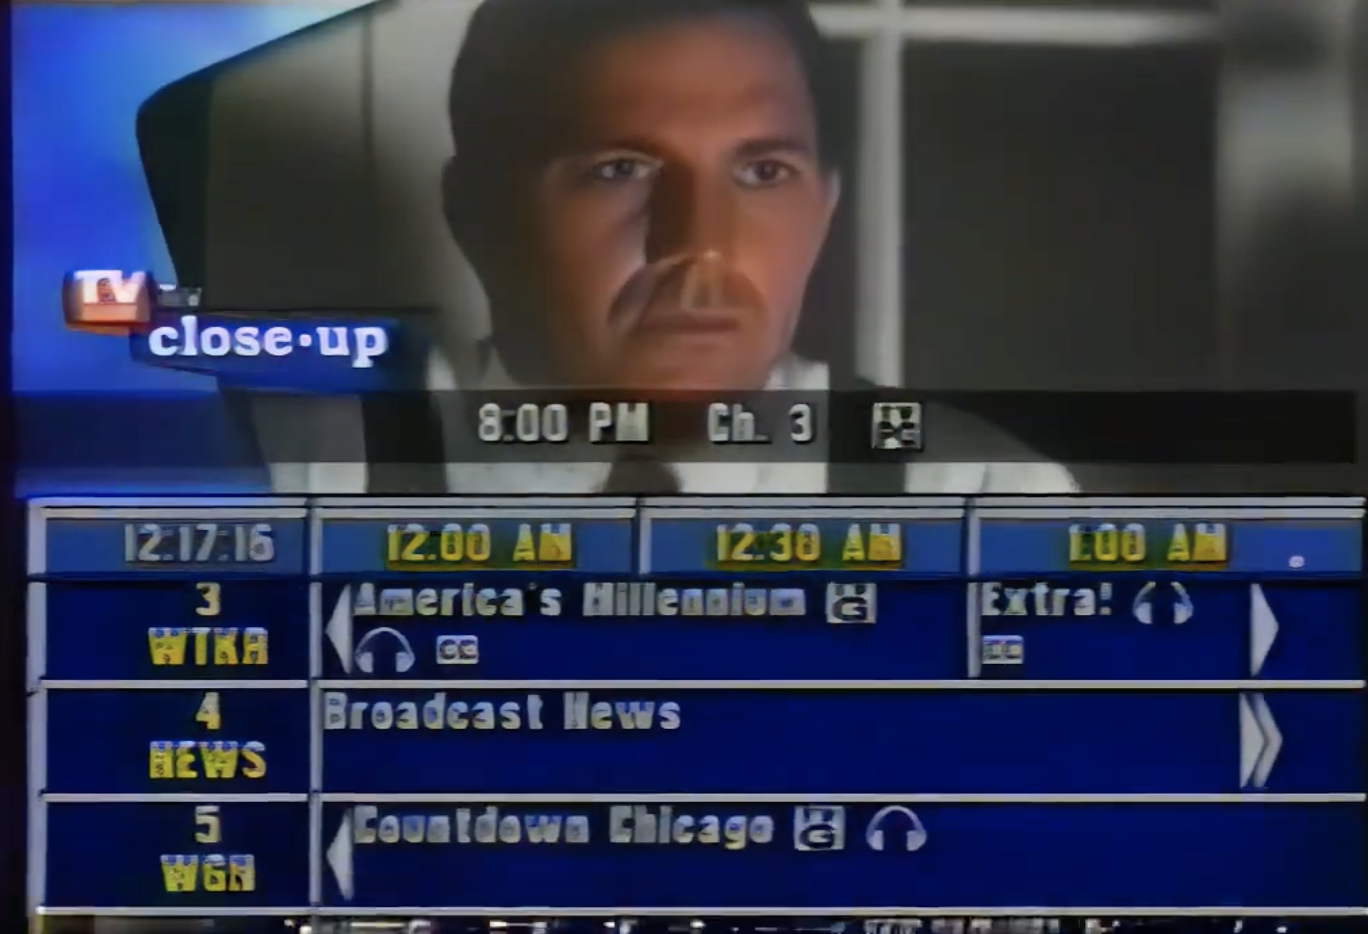 TV screen showing a program guide with broadcast channels and times, and a close-up of a man from a movie